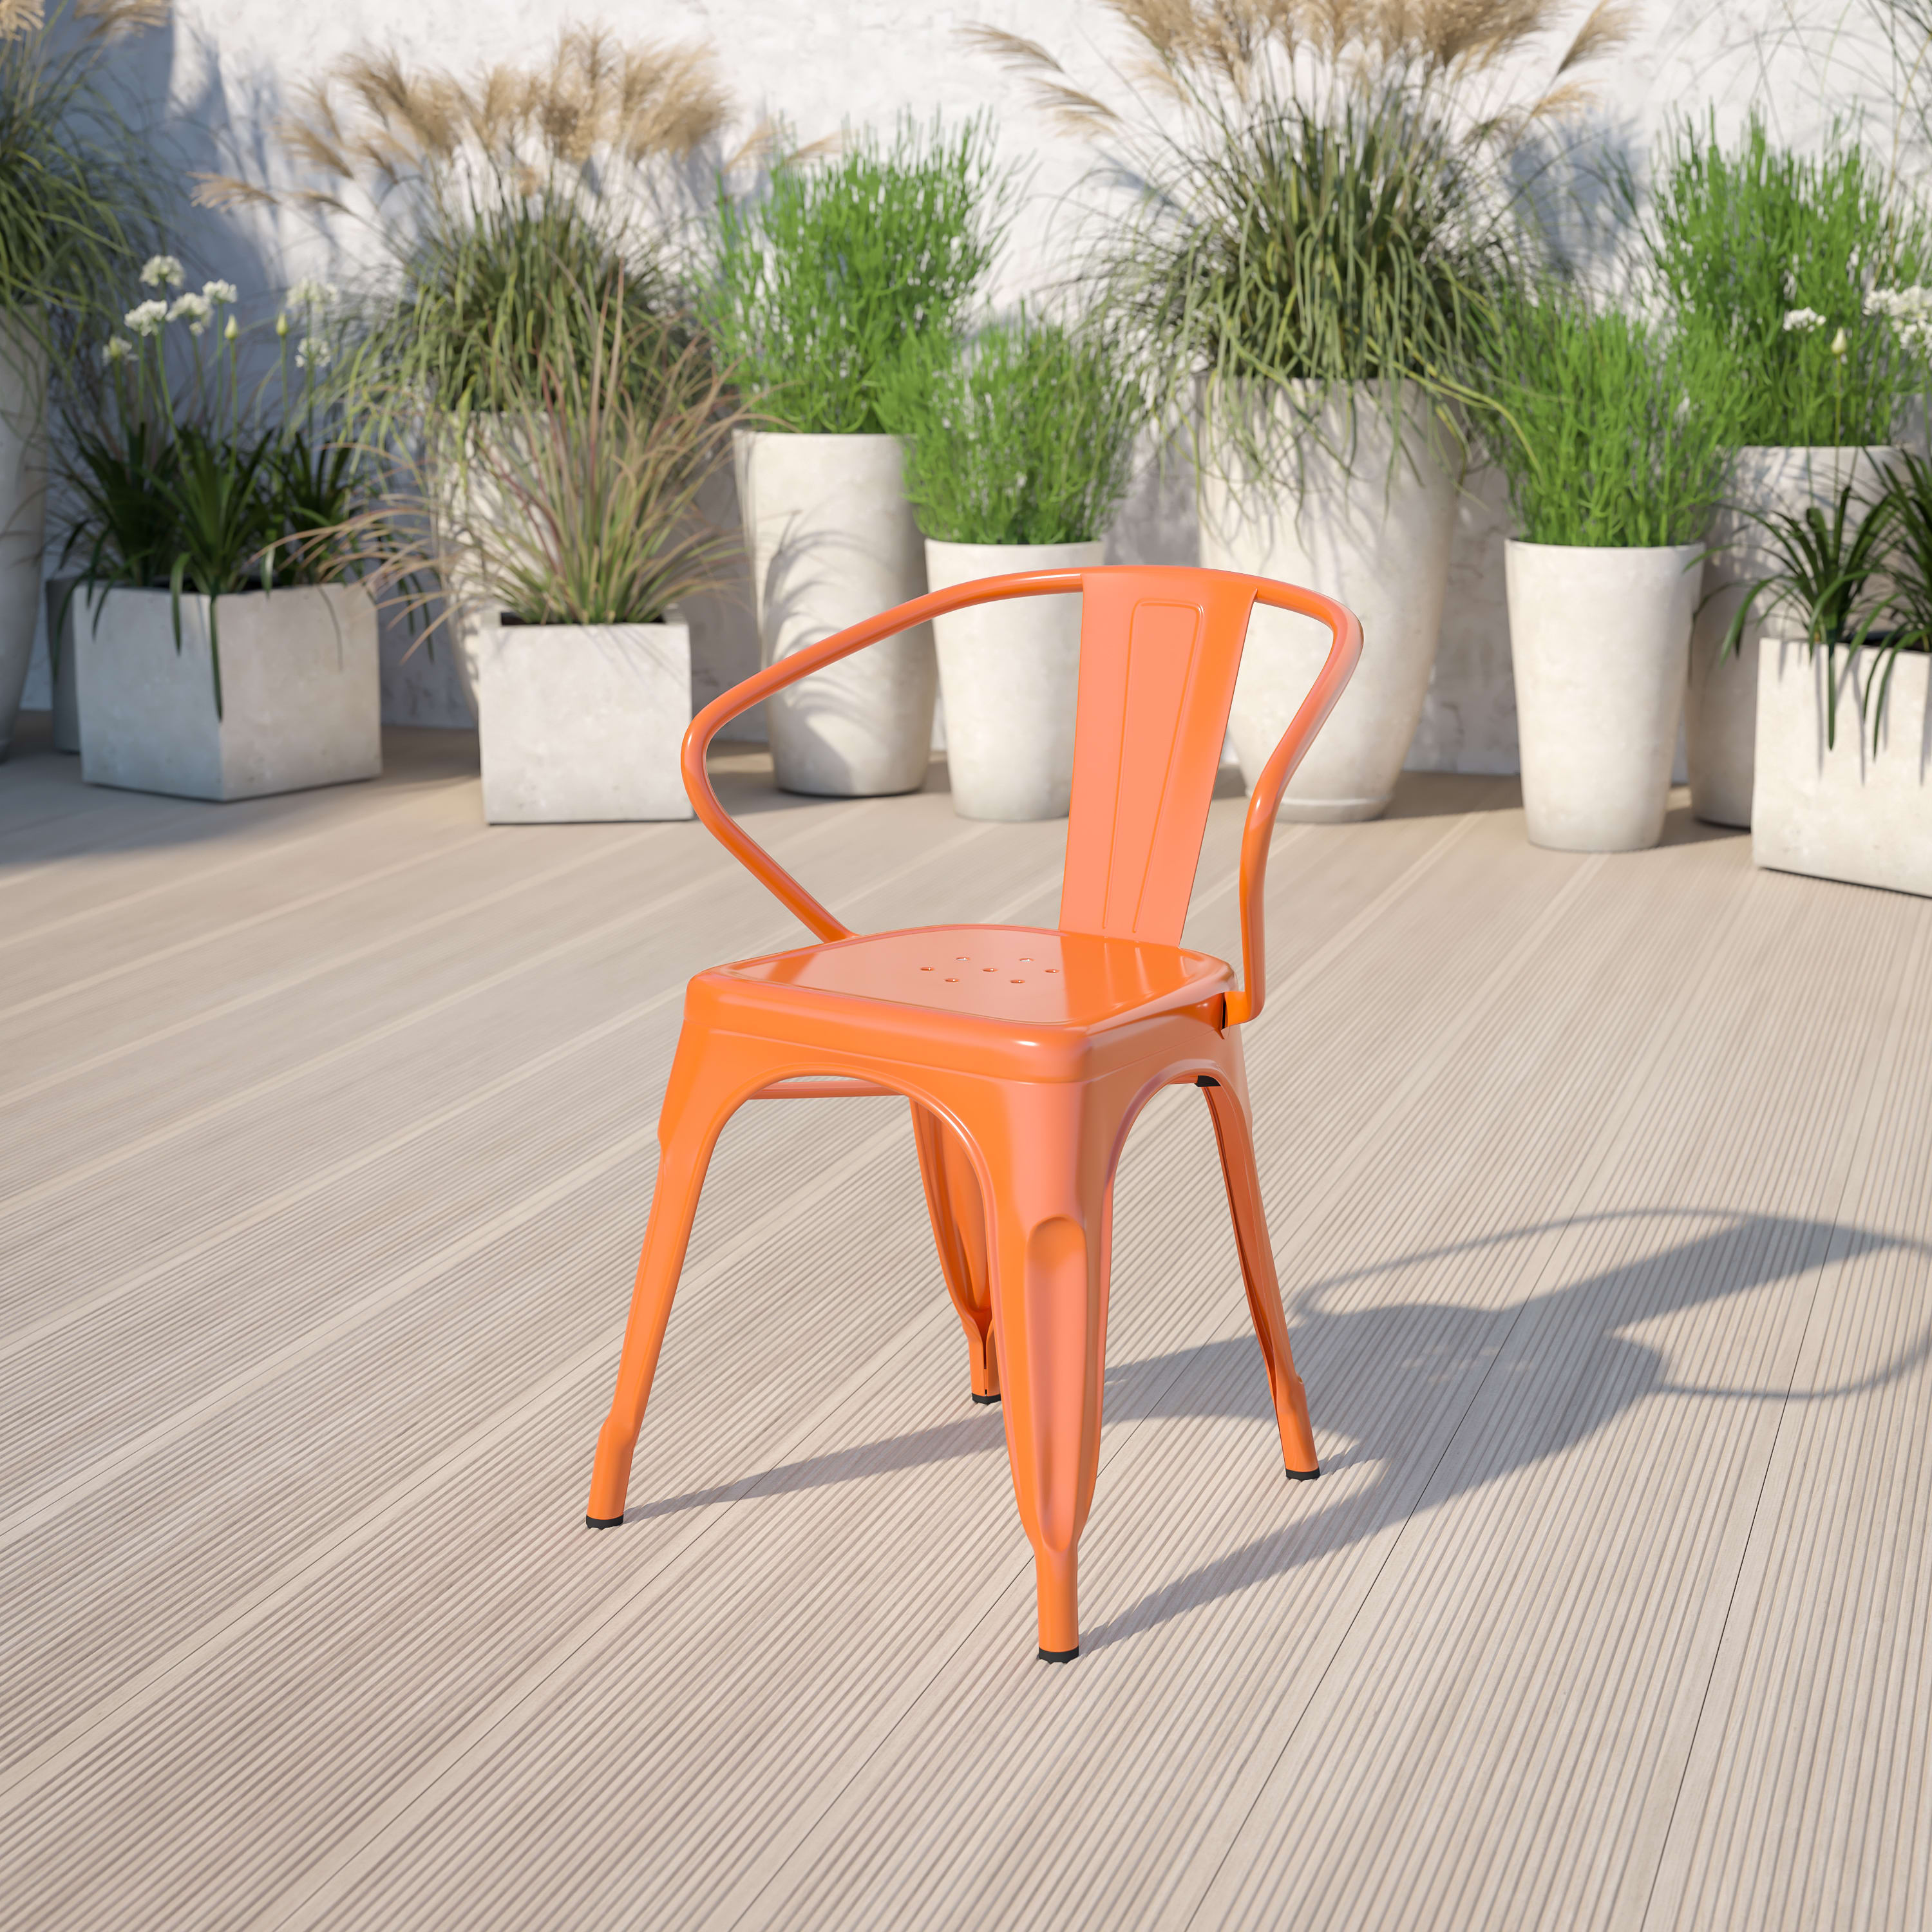 Flash Furniture Commercial Grade Orange Metal Indoor-Outdoor Chair with Arms - image 1 of 12